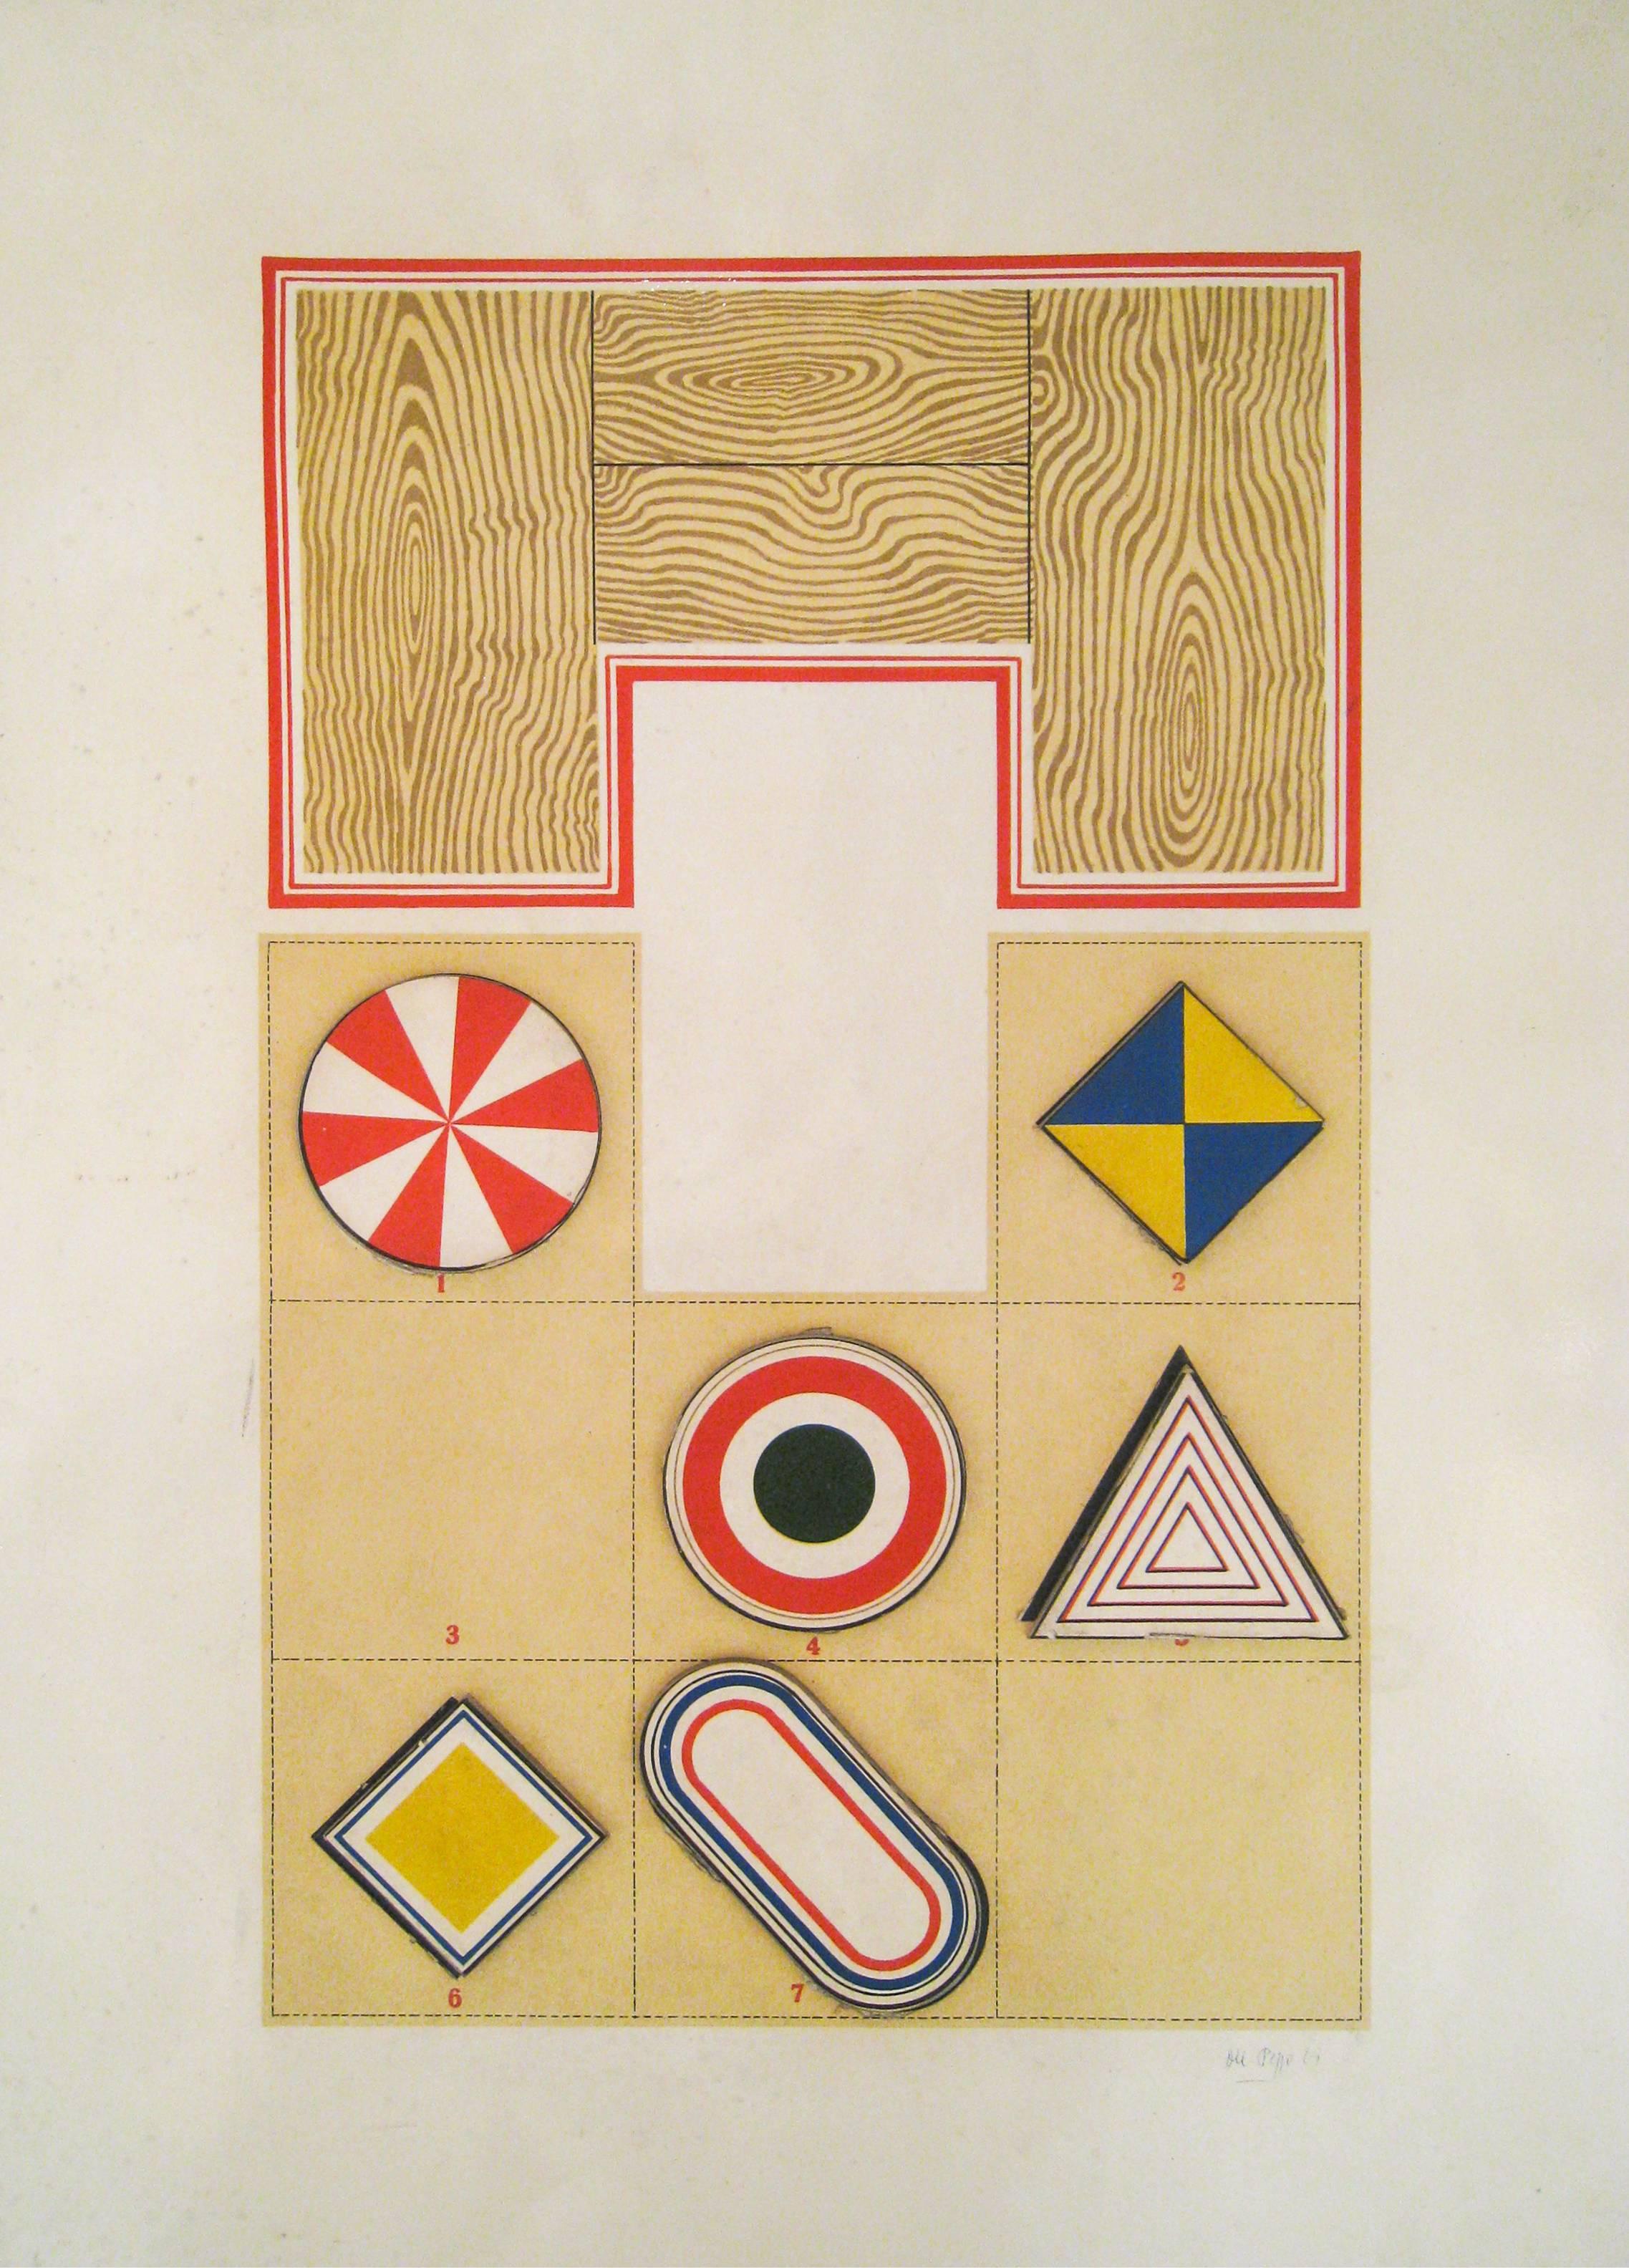 Lucio Del Pezzo (1933) Alchemical Table, 1969, mixed media on cardboard, signed and dated "69" lower right.

SIZE: cm. 70 x 50
SIZE WITH FRAME: cm. 75 x 55 x 5

Certificate of Authenticity:
Galleria Michelangelo